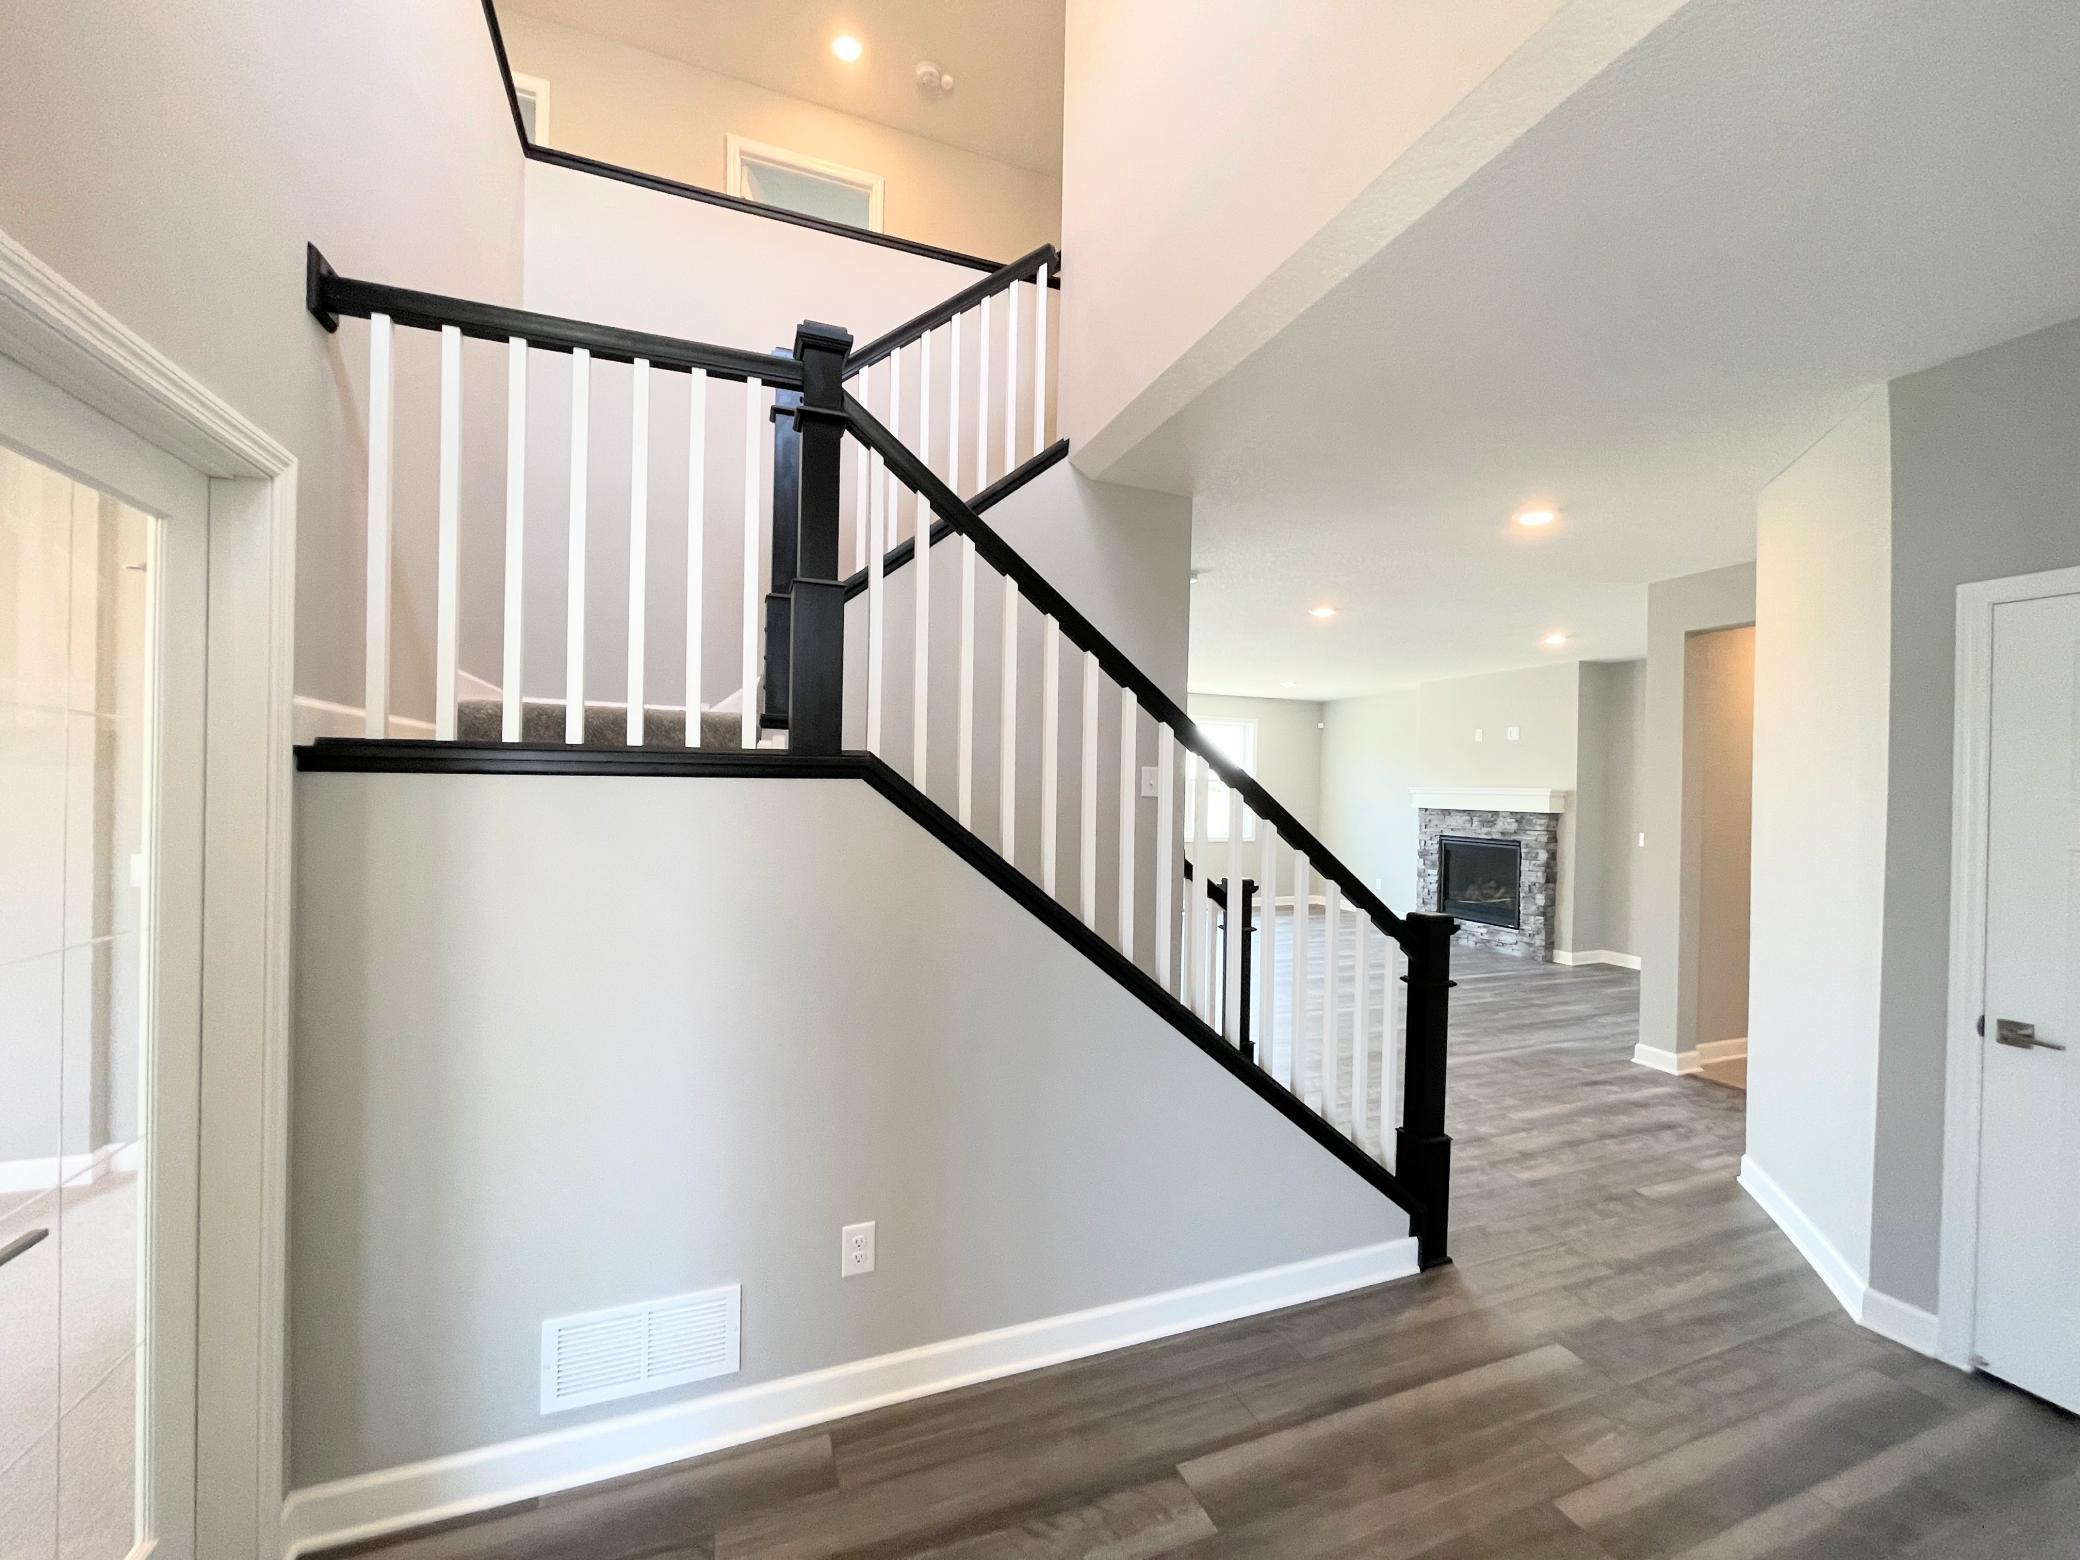 The elegant staircase makes an elegant statement at your front entry. Imagine the fun you can have with Photos are of the actual home.